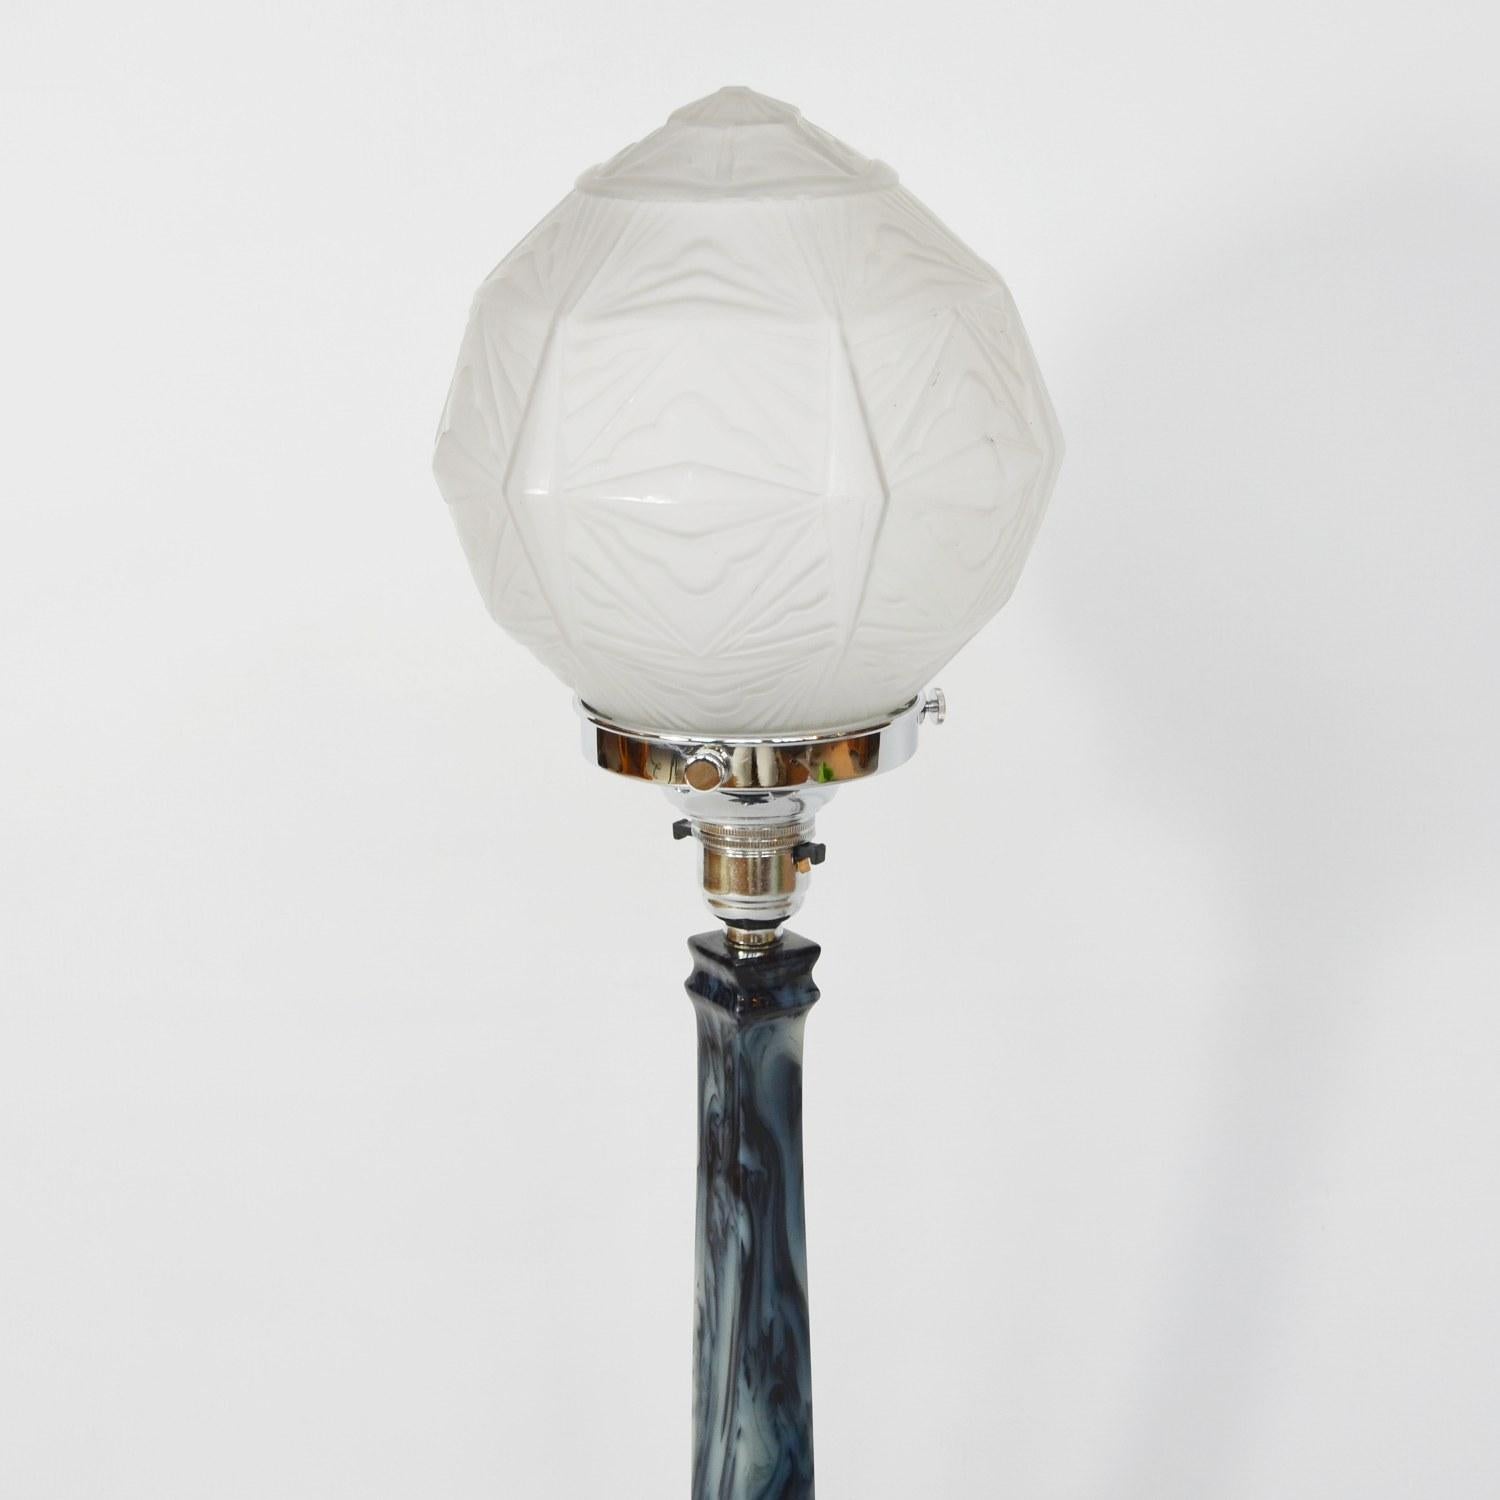 An Art Deco table lamp. Blue and white marbled Catalin stem and base, with a multifaceted frosted globe shade.

Dimensions: H 20 cm, W 12.5 cm

Origin: English

Item no: 210204

All of our lighting is fully refurbished, re-wired, and